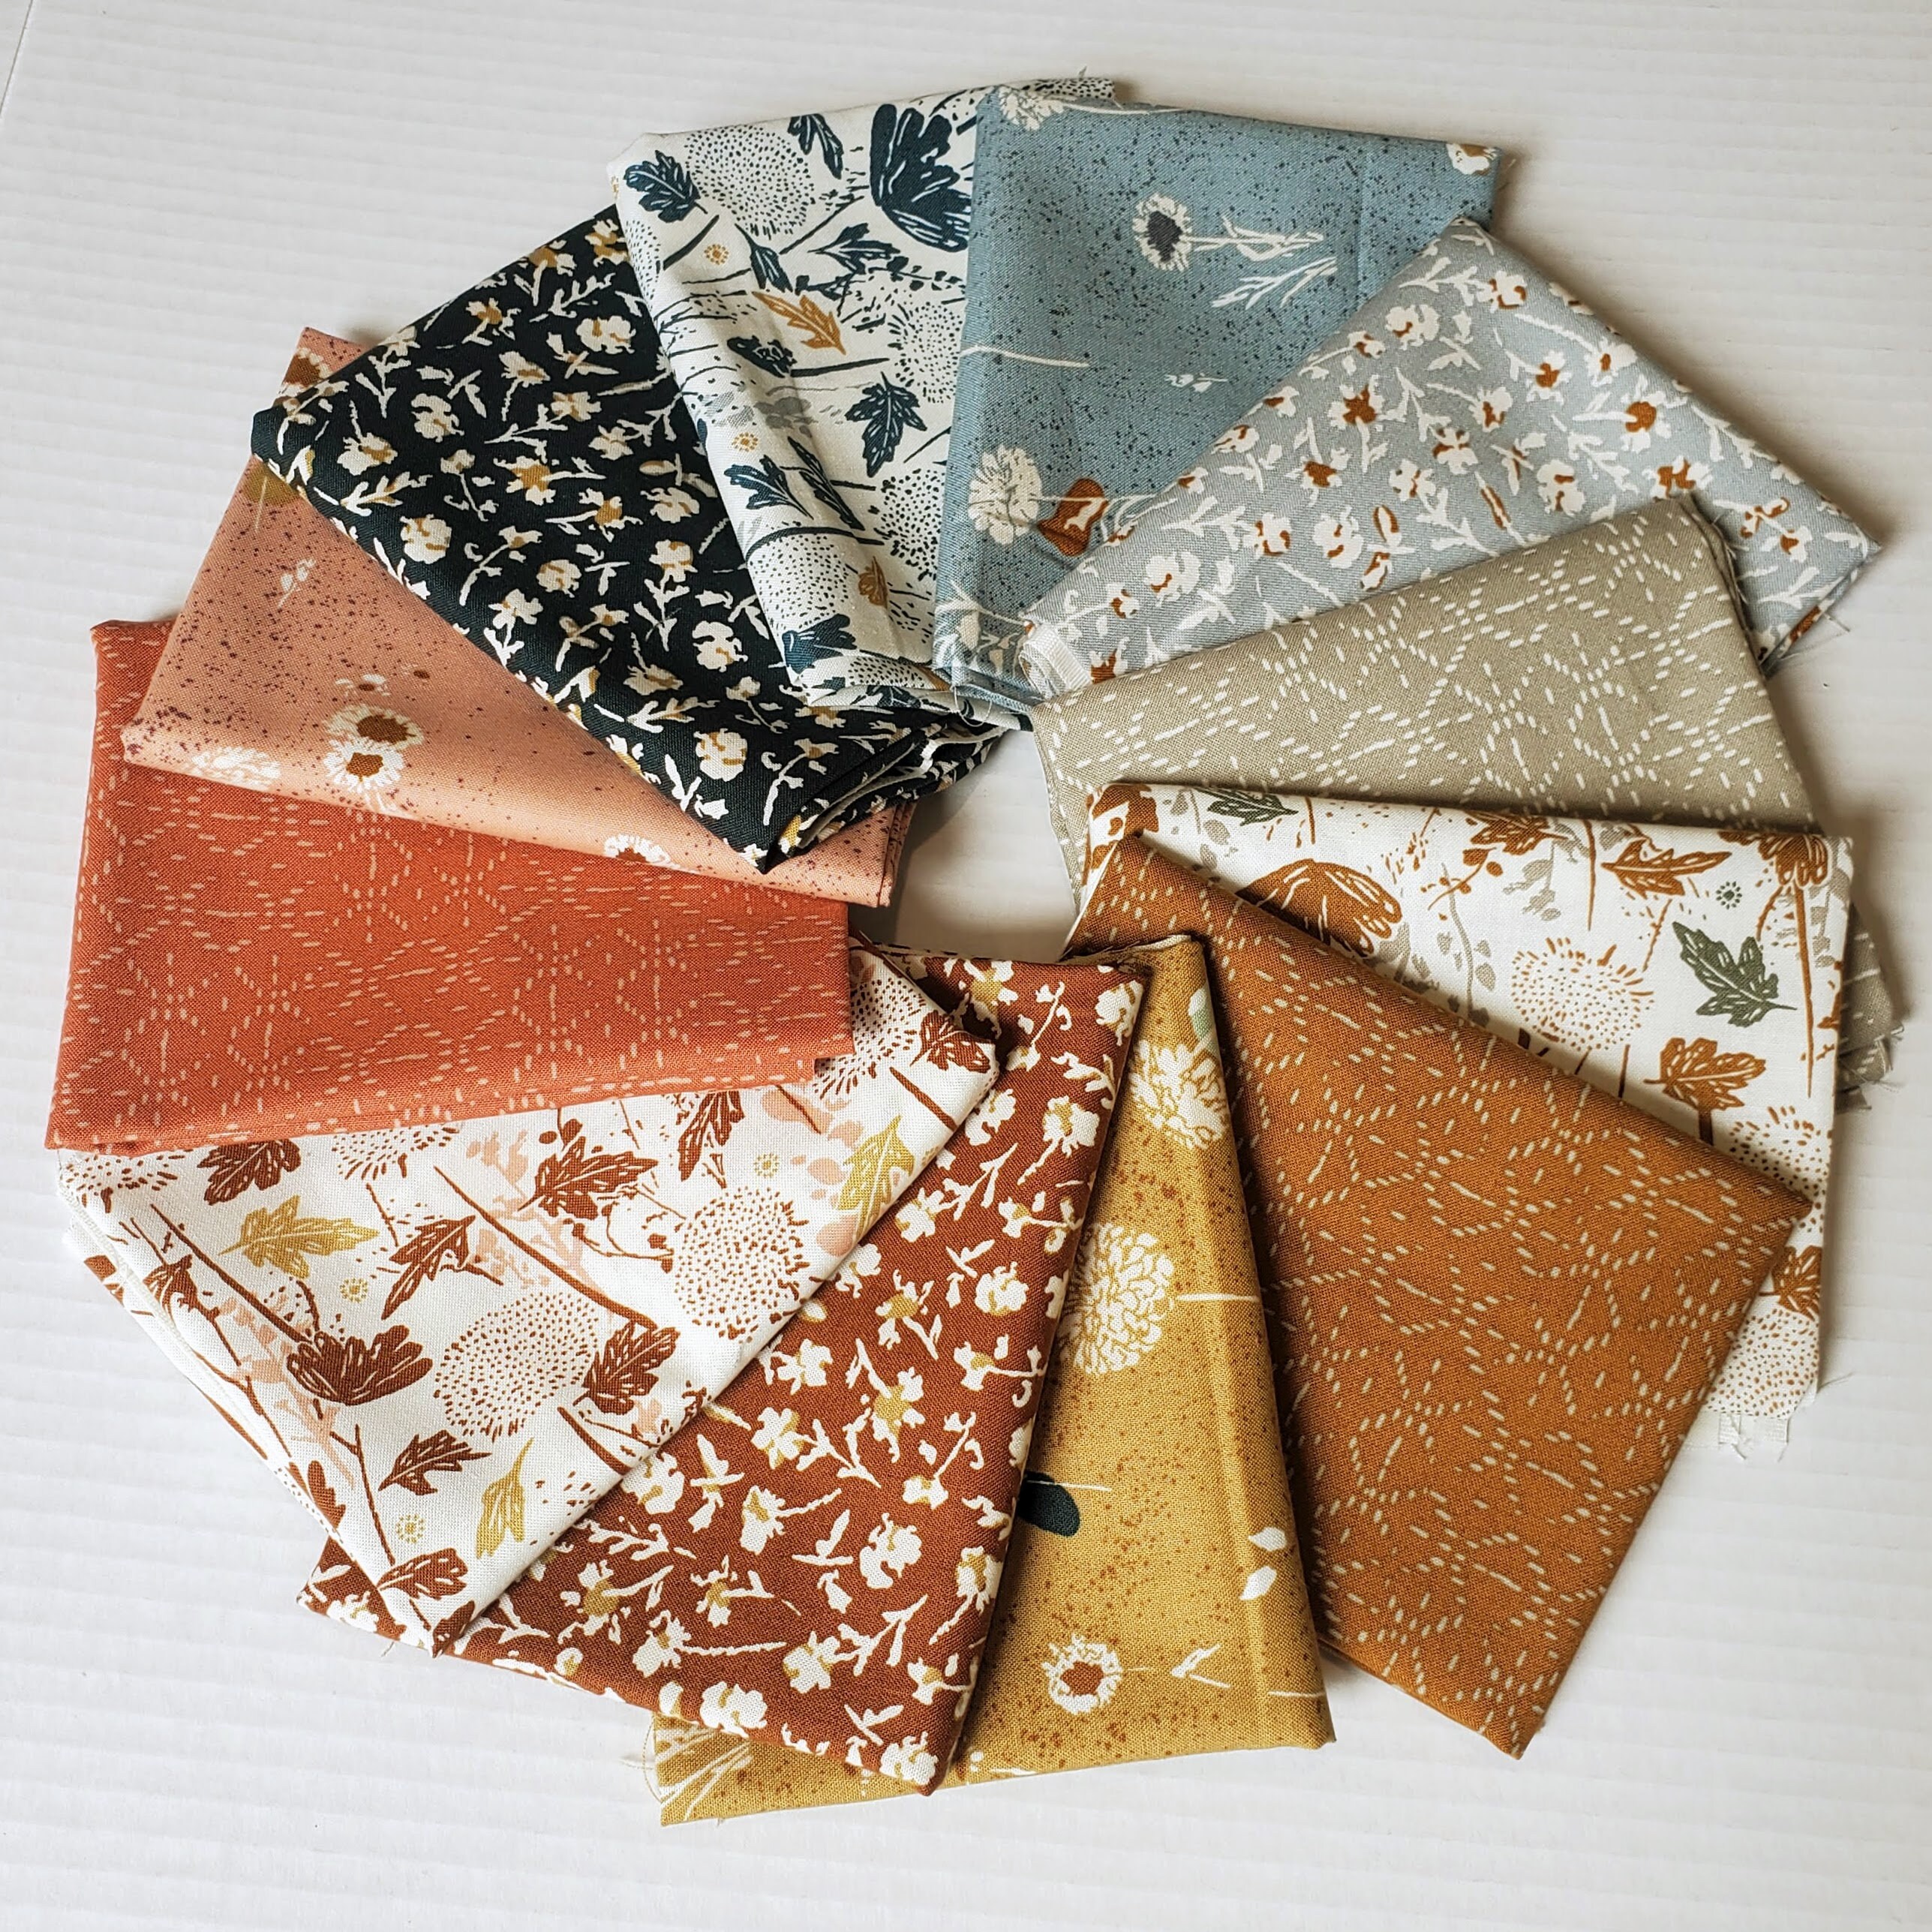 Earthy Colors Cloth for Embroidery, Kona Cotton Quilting Solids Bundle,  Fall Fat Quarter Fabric Collection, Basic Hand Embroidery Supplies 